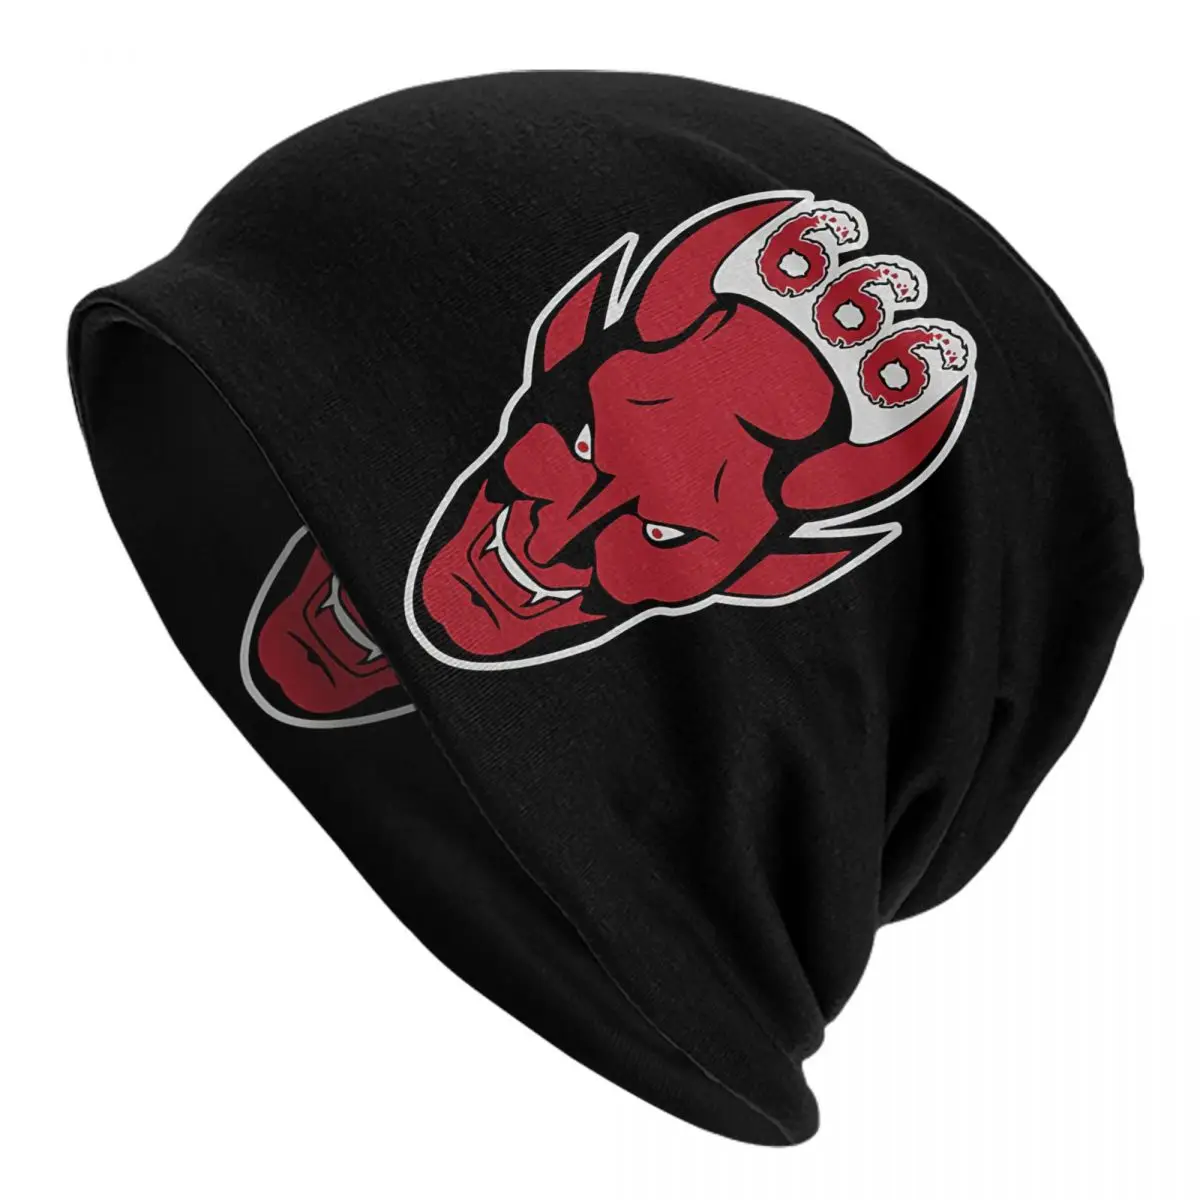 666 Active Adult Men's Women's Knit Hat Keep warm winter Funny knitted hat